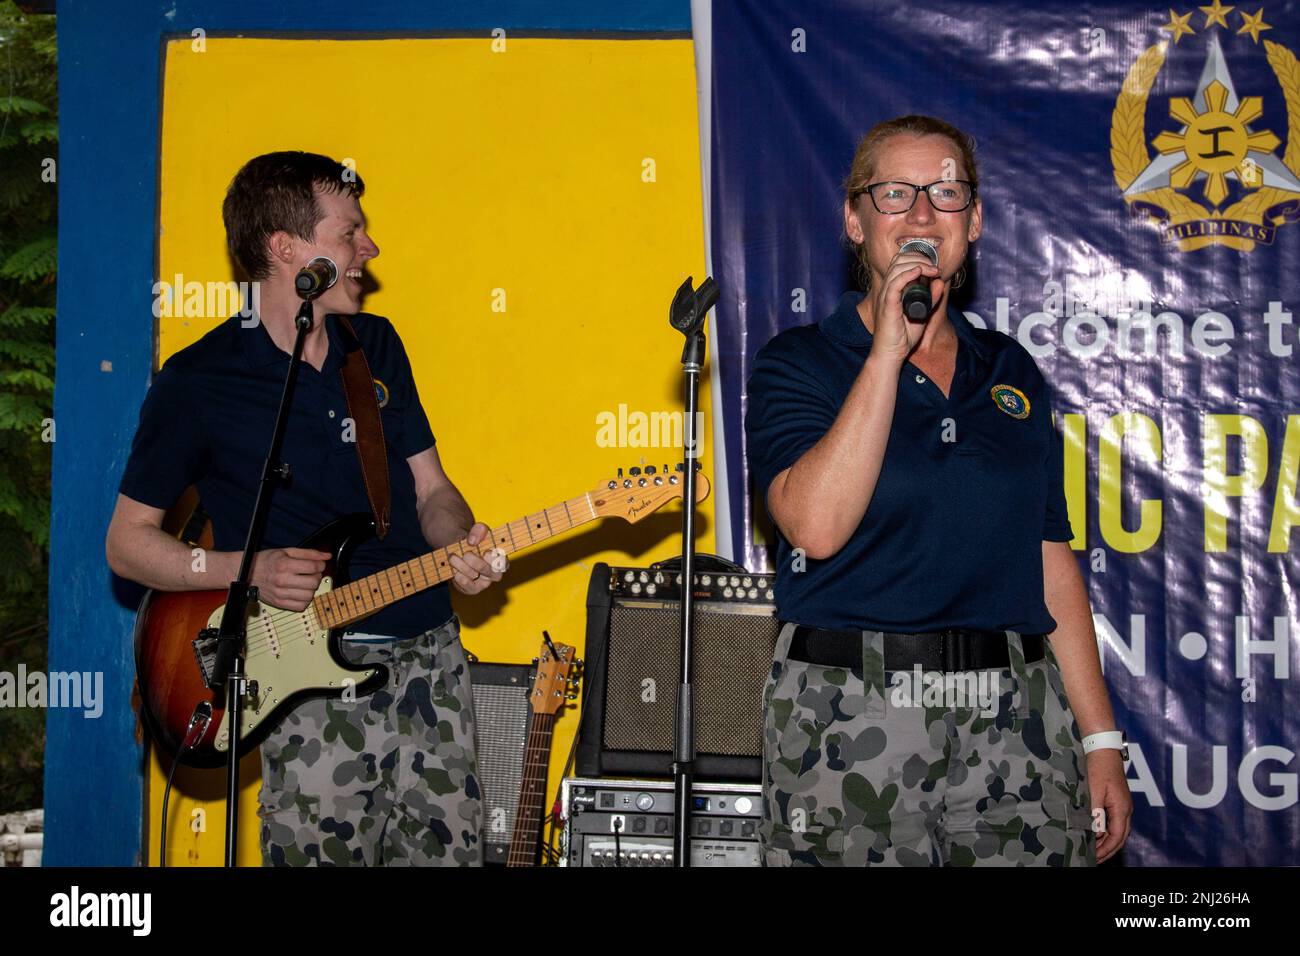 PUERTO PRINCESA, Philippines (Aug. 4, 2022) – Royal Australian Navy Able Body Seaman Claire Donoghue, right, and Able Body Seaman Philip Edey, musicians in the Royal Australian Navy Band, perform with members of the U.S. Pacific Fleet Band during a community outreach event at San Rafael High School during Pacific Partnership 2022. Now in its 17th year, Pacific Partnership is the largest annual multinational humanitarian assistance and disaster relief preparedness mission conducted in the Indo-Pacific. Stock Photo